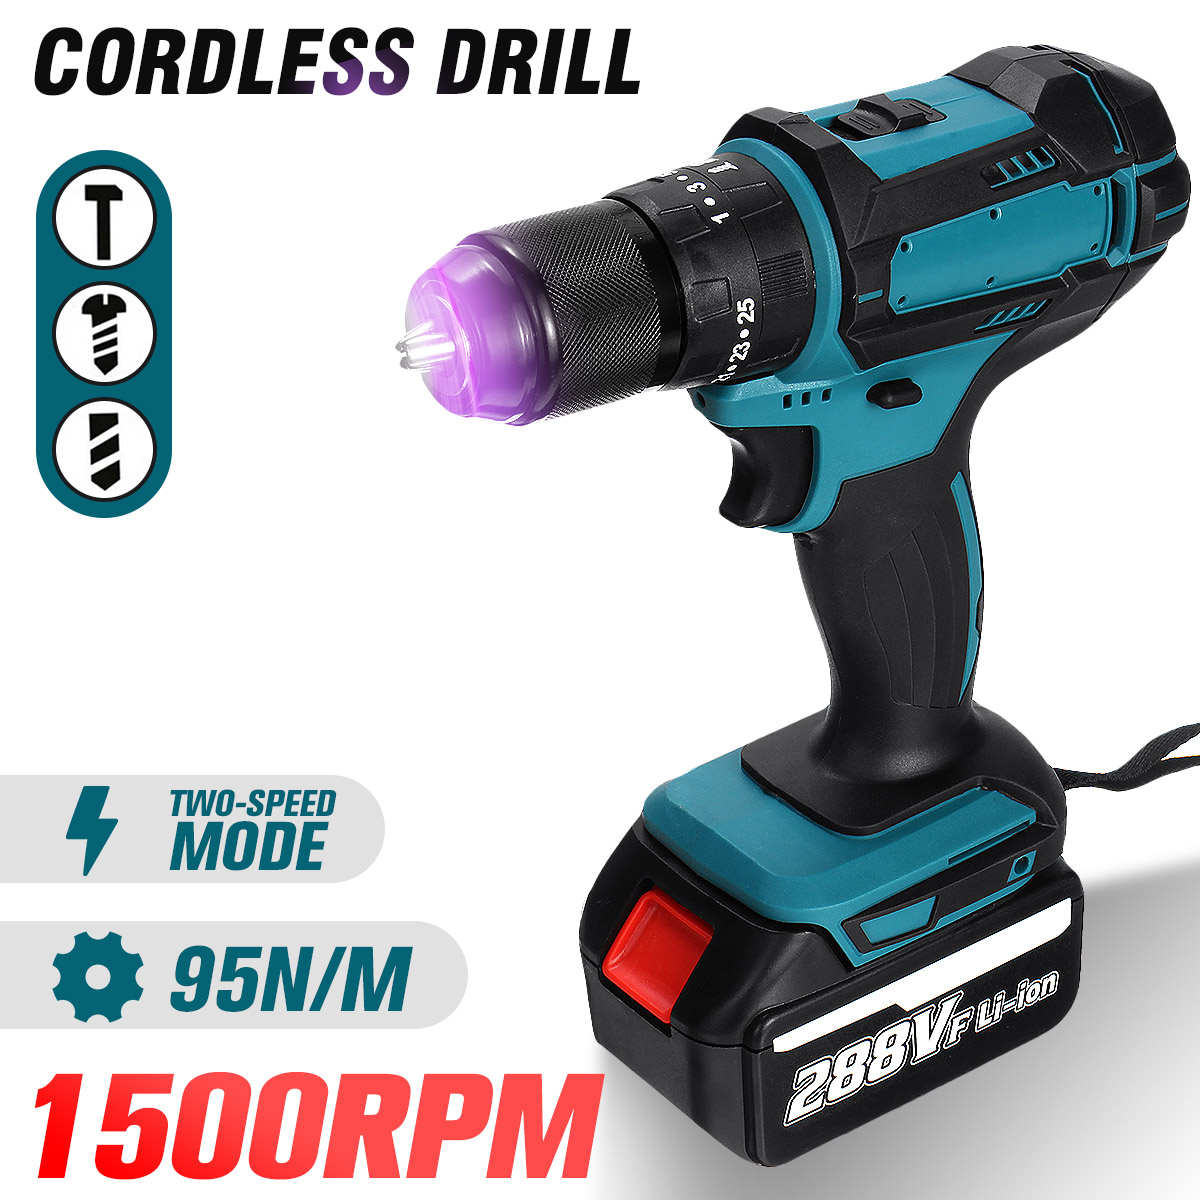 13mm-800W-Cordless-Brushless-Impact-Drill-Driver-253-Torque-Electric-Drill-Screwdriver-For-Makita-18-1880979-1